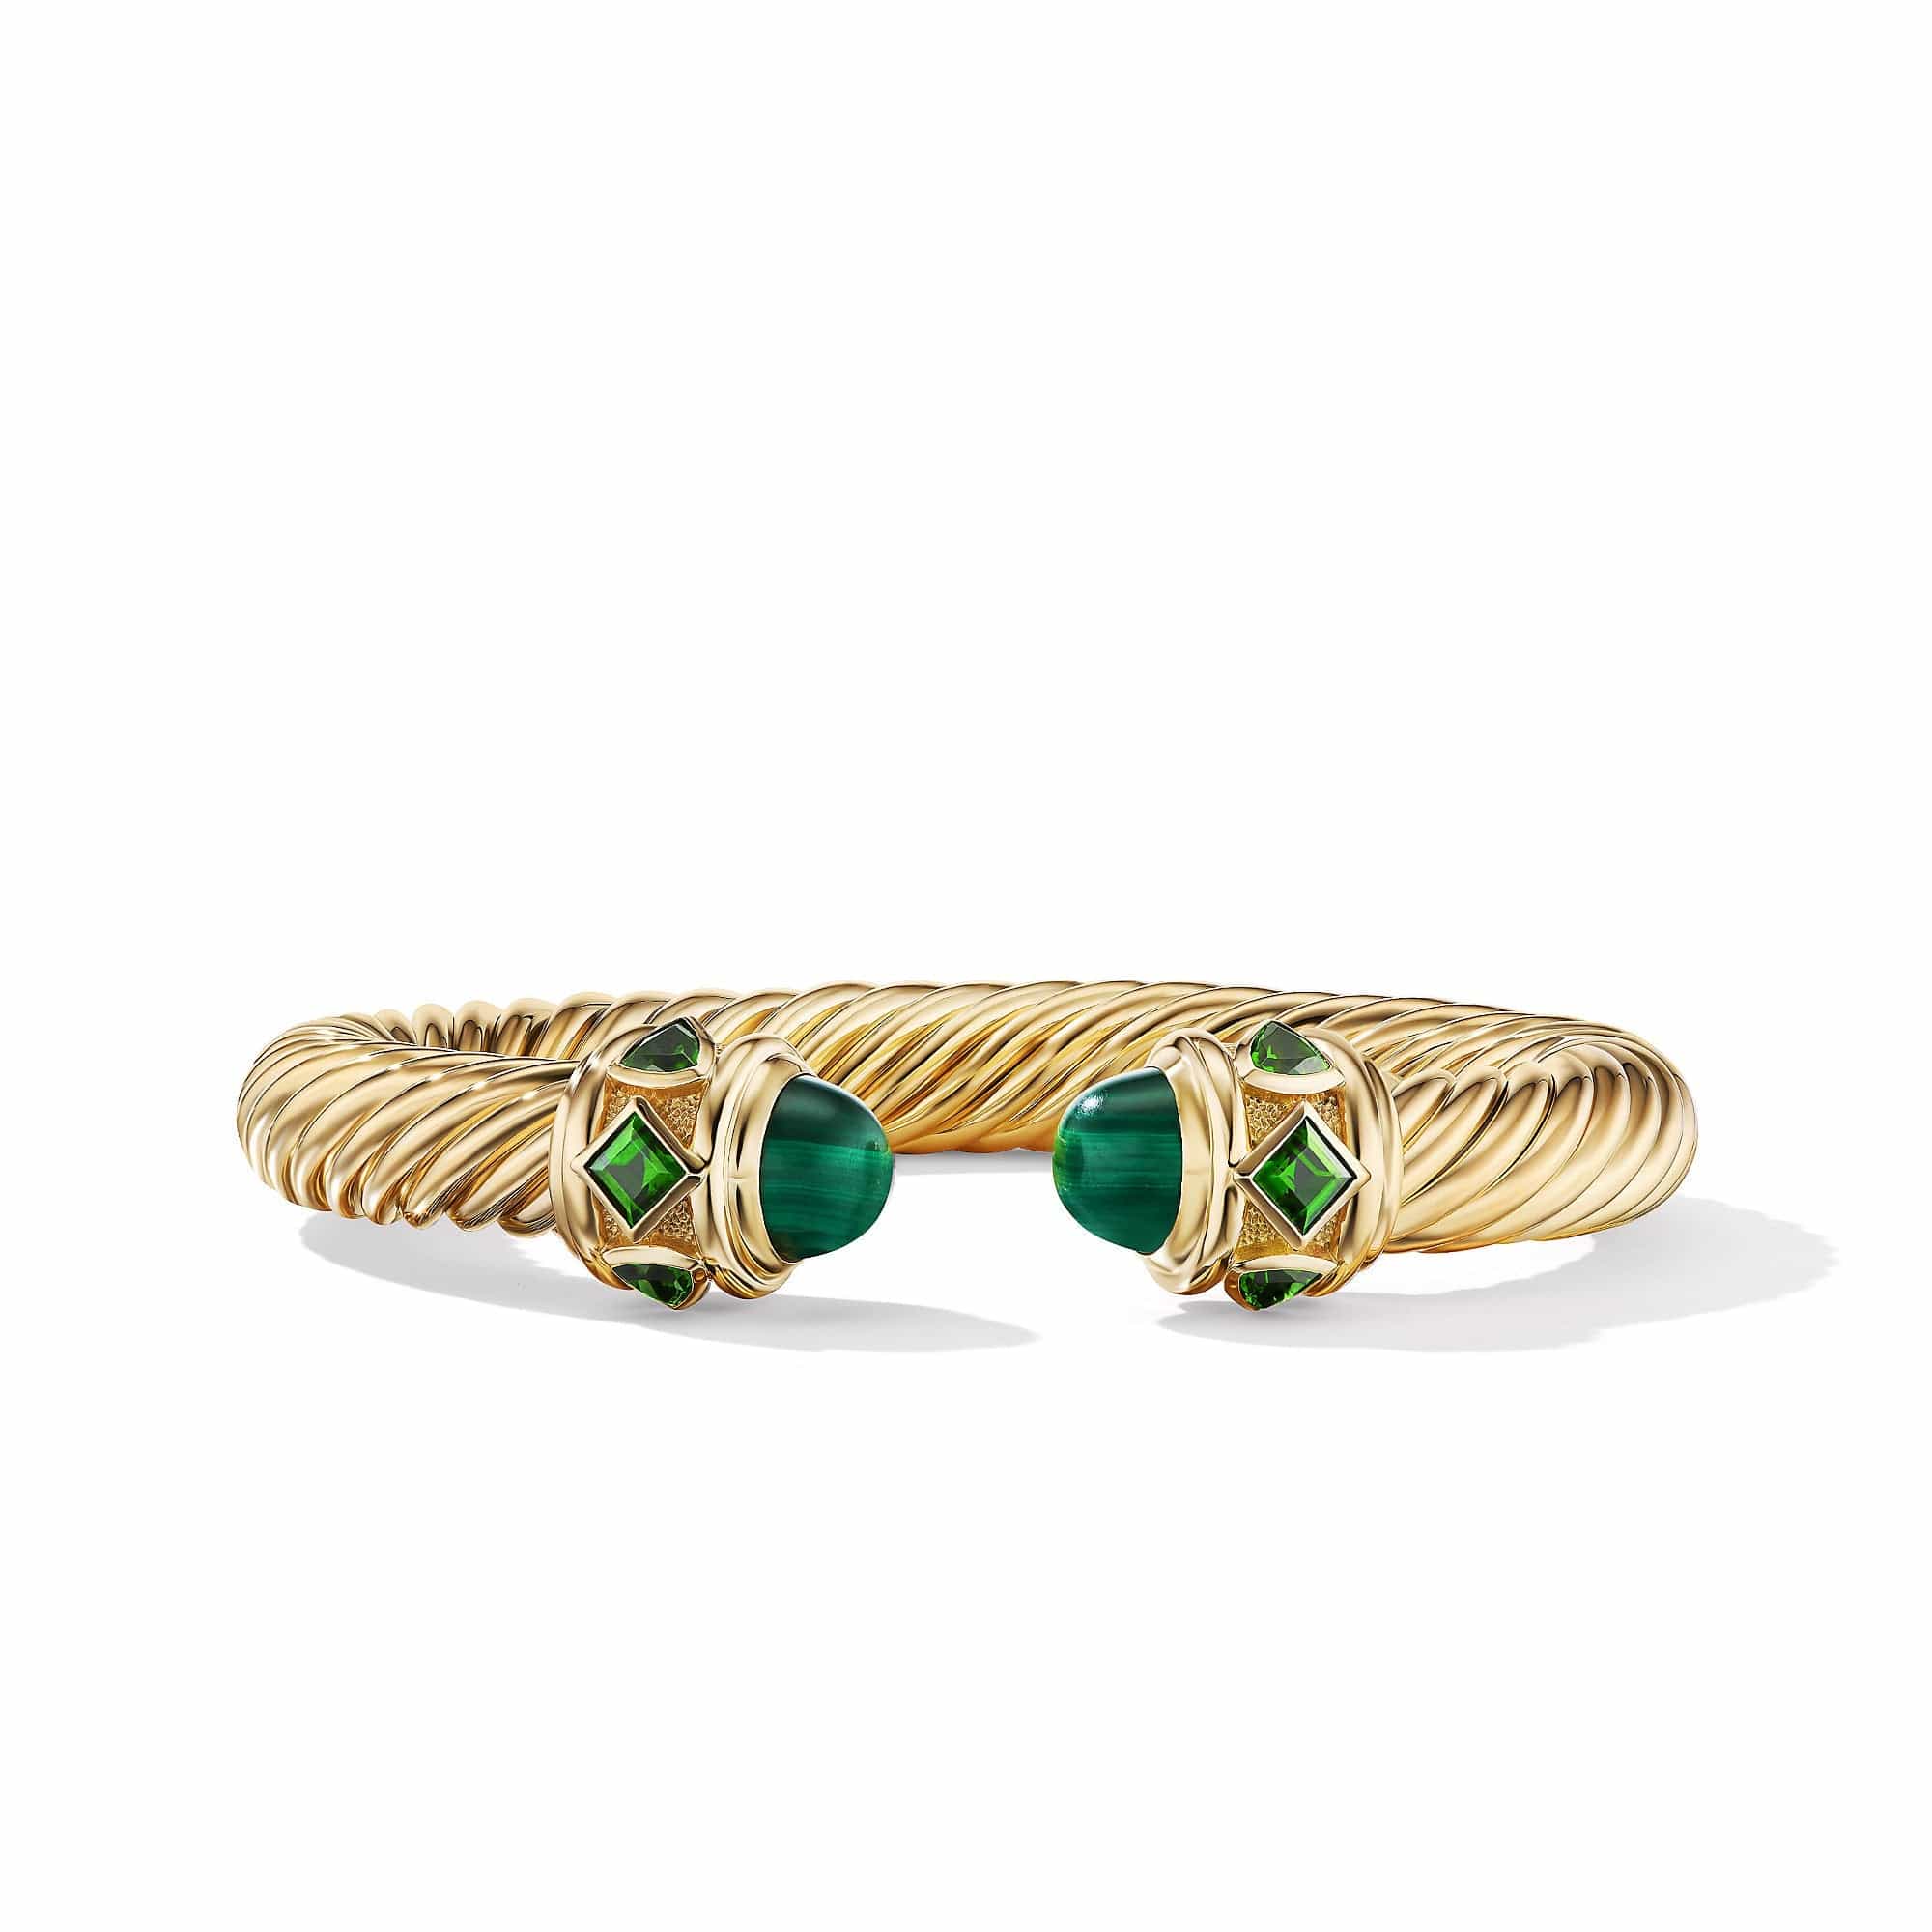 Renaissance Bracelet in 18K Yellow Gold with Malachite and Green Chrome Diopside